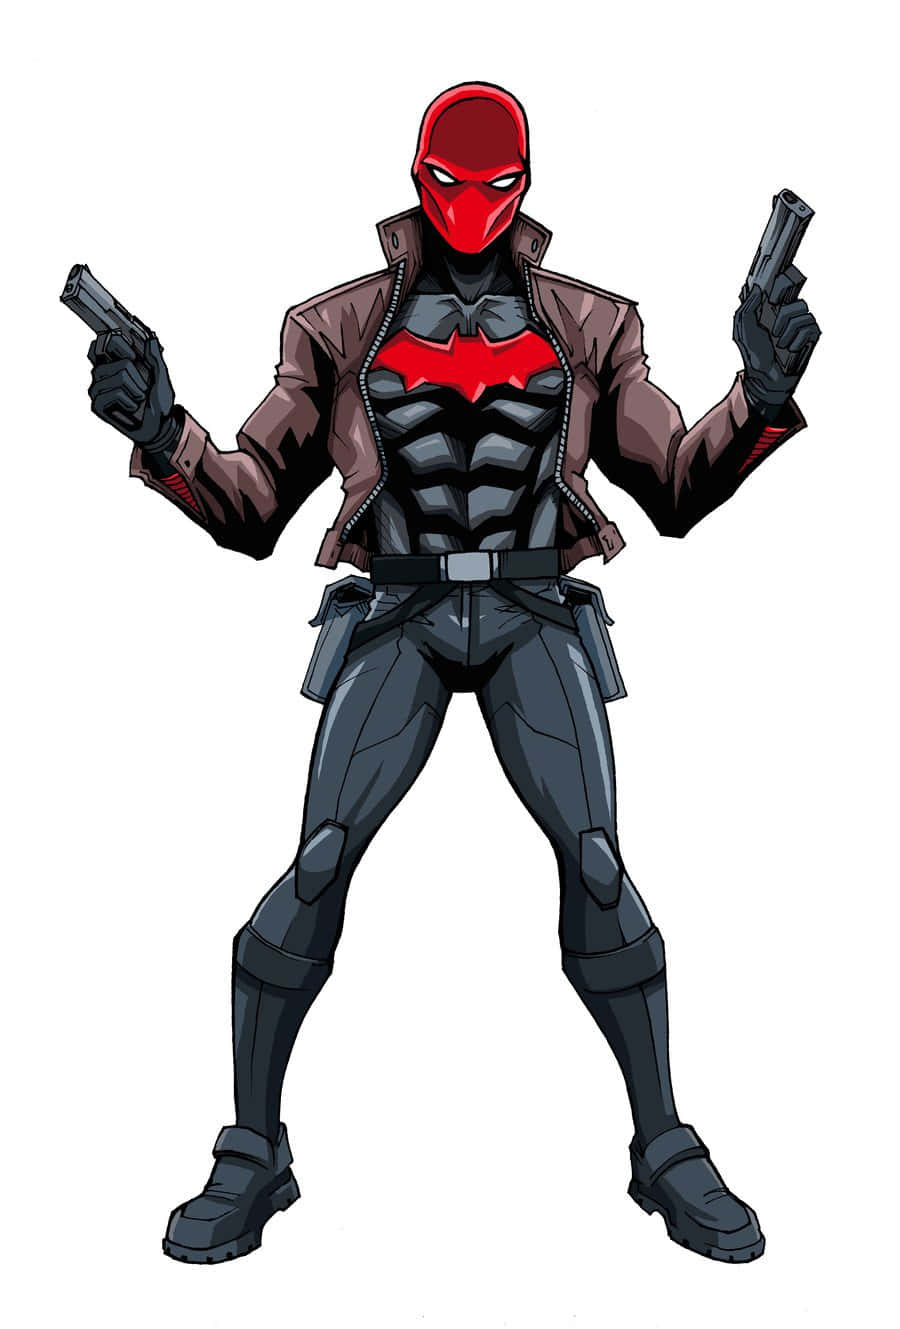 Protecting the innocent in the city of Gotham - Red Hood